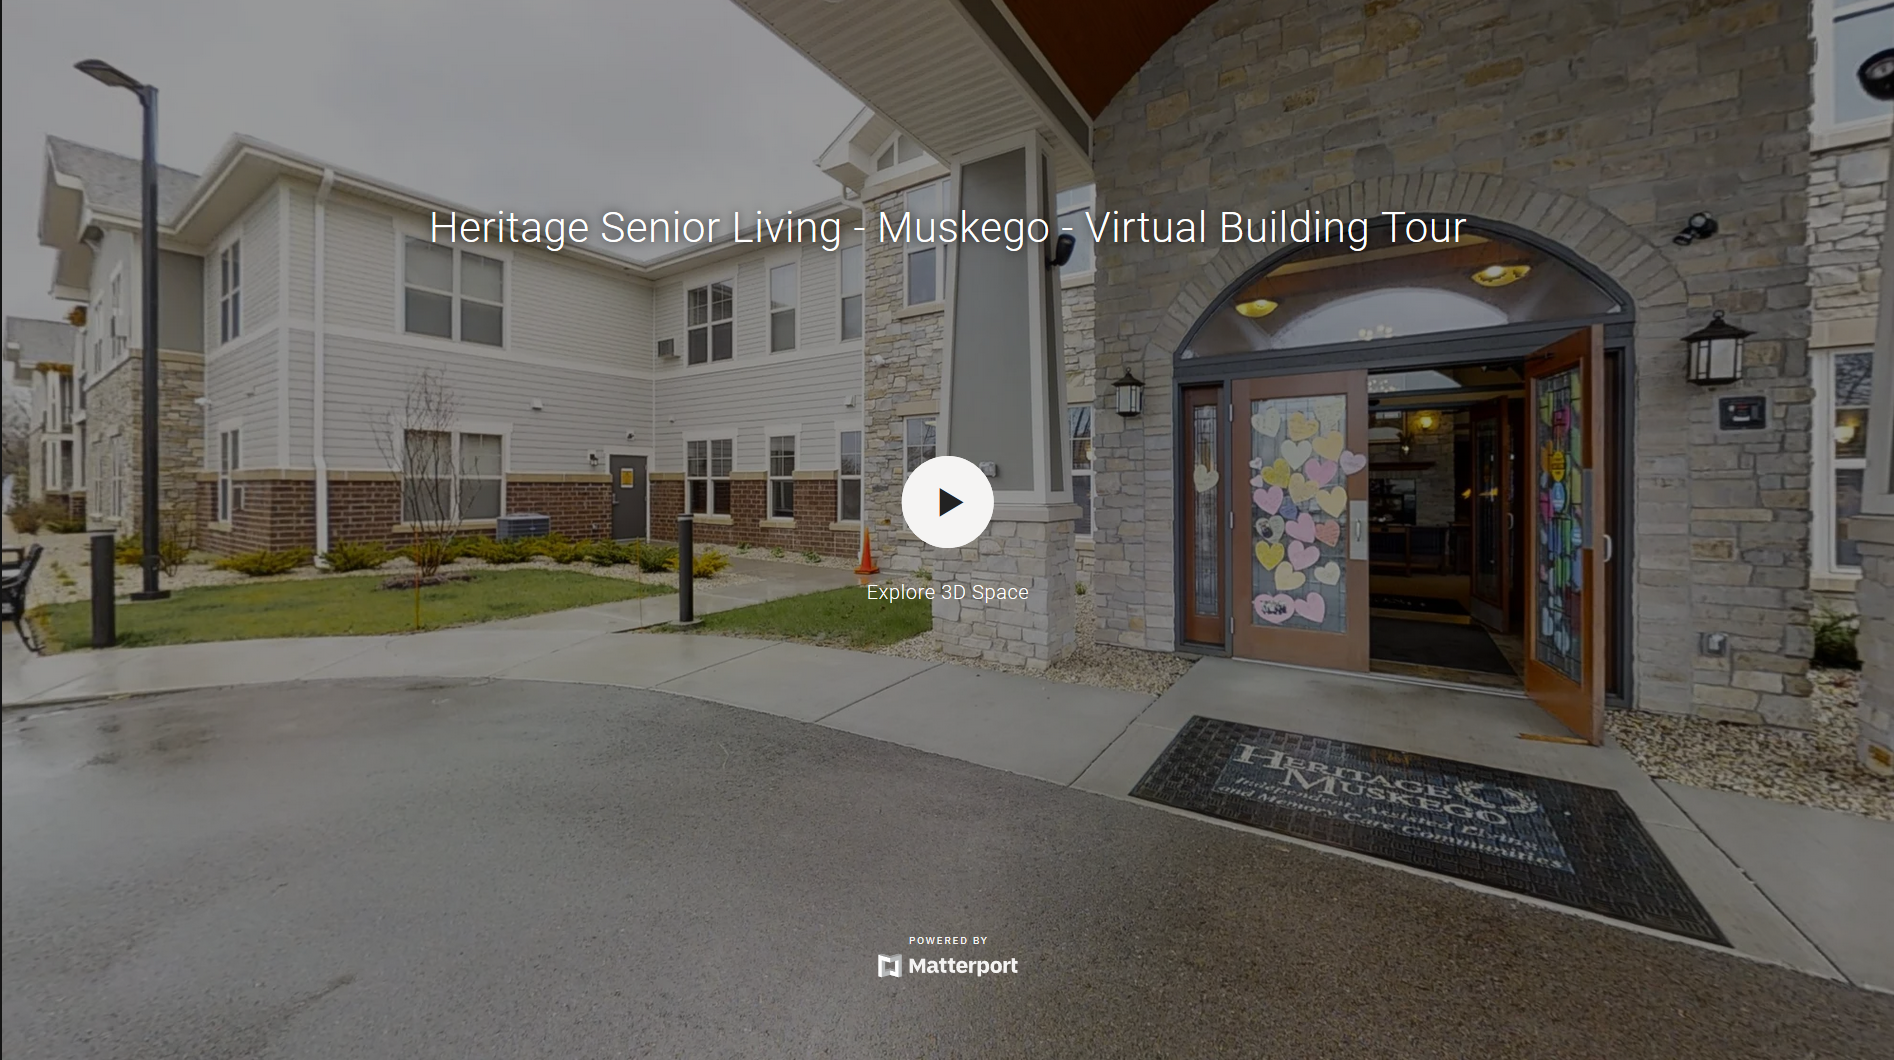 Explore Heritage Muskego in 3D with our 3D tour. View our various buildings around Heritage Muskego.